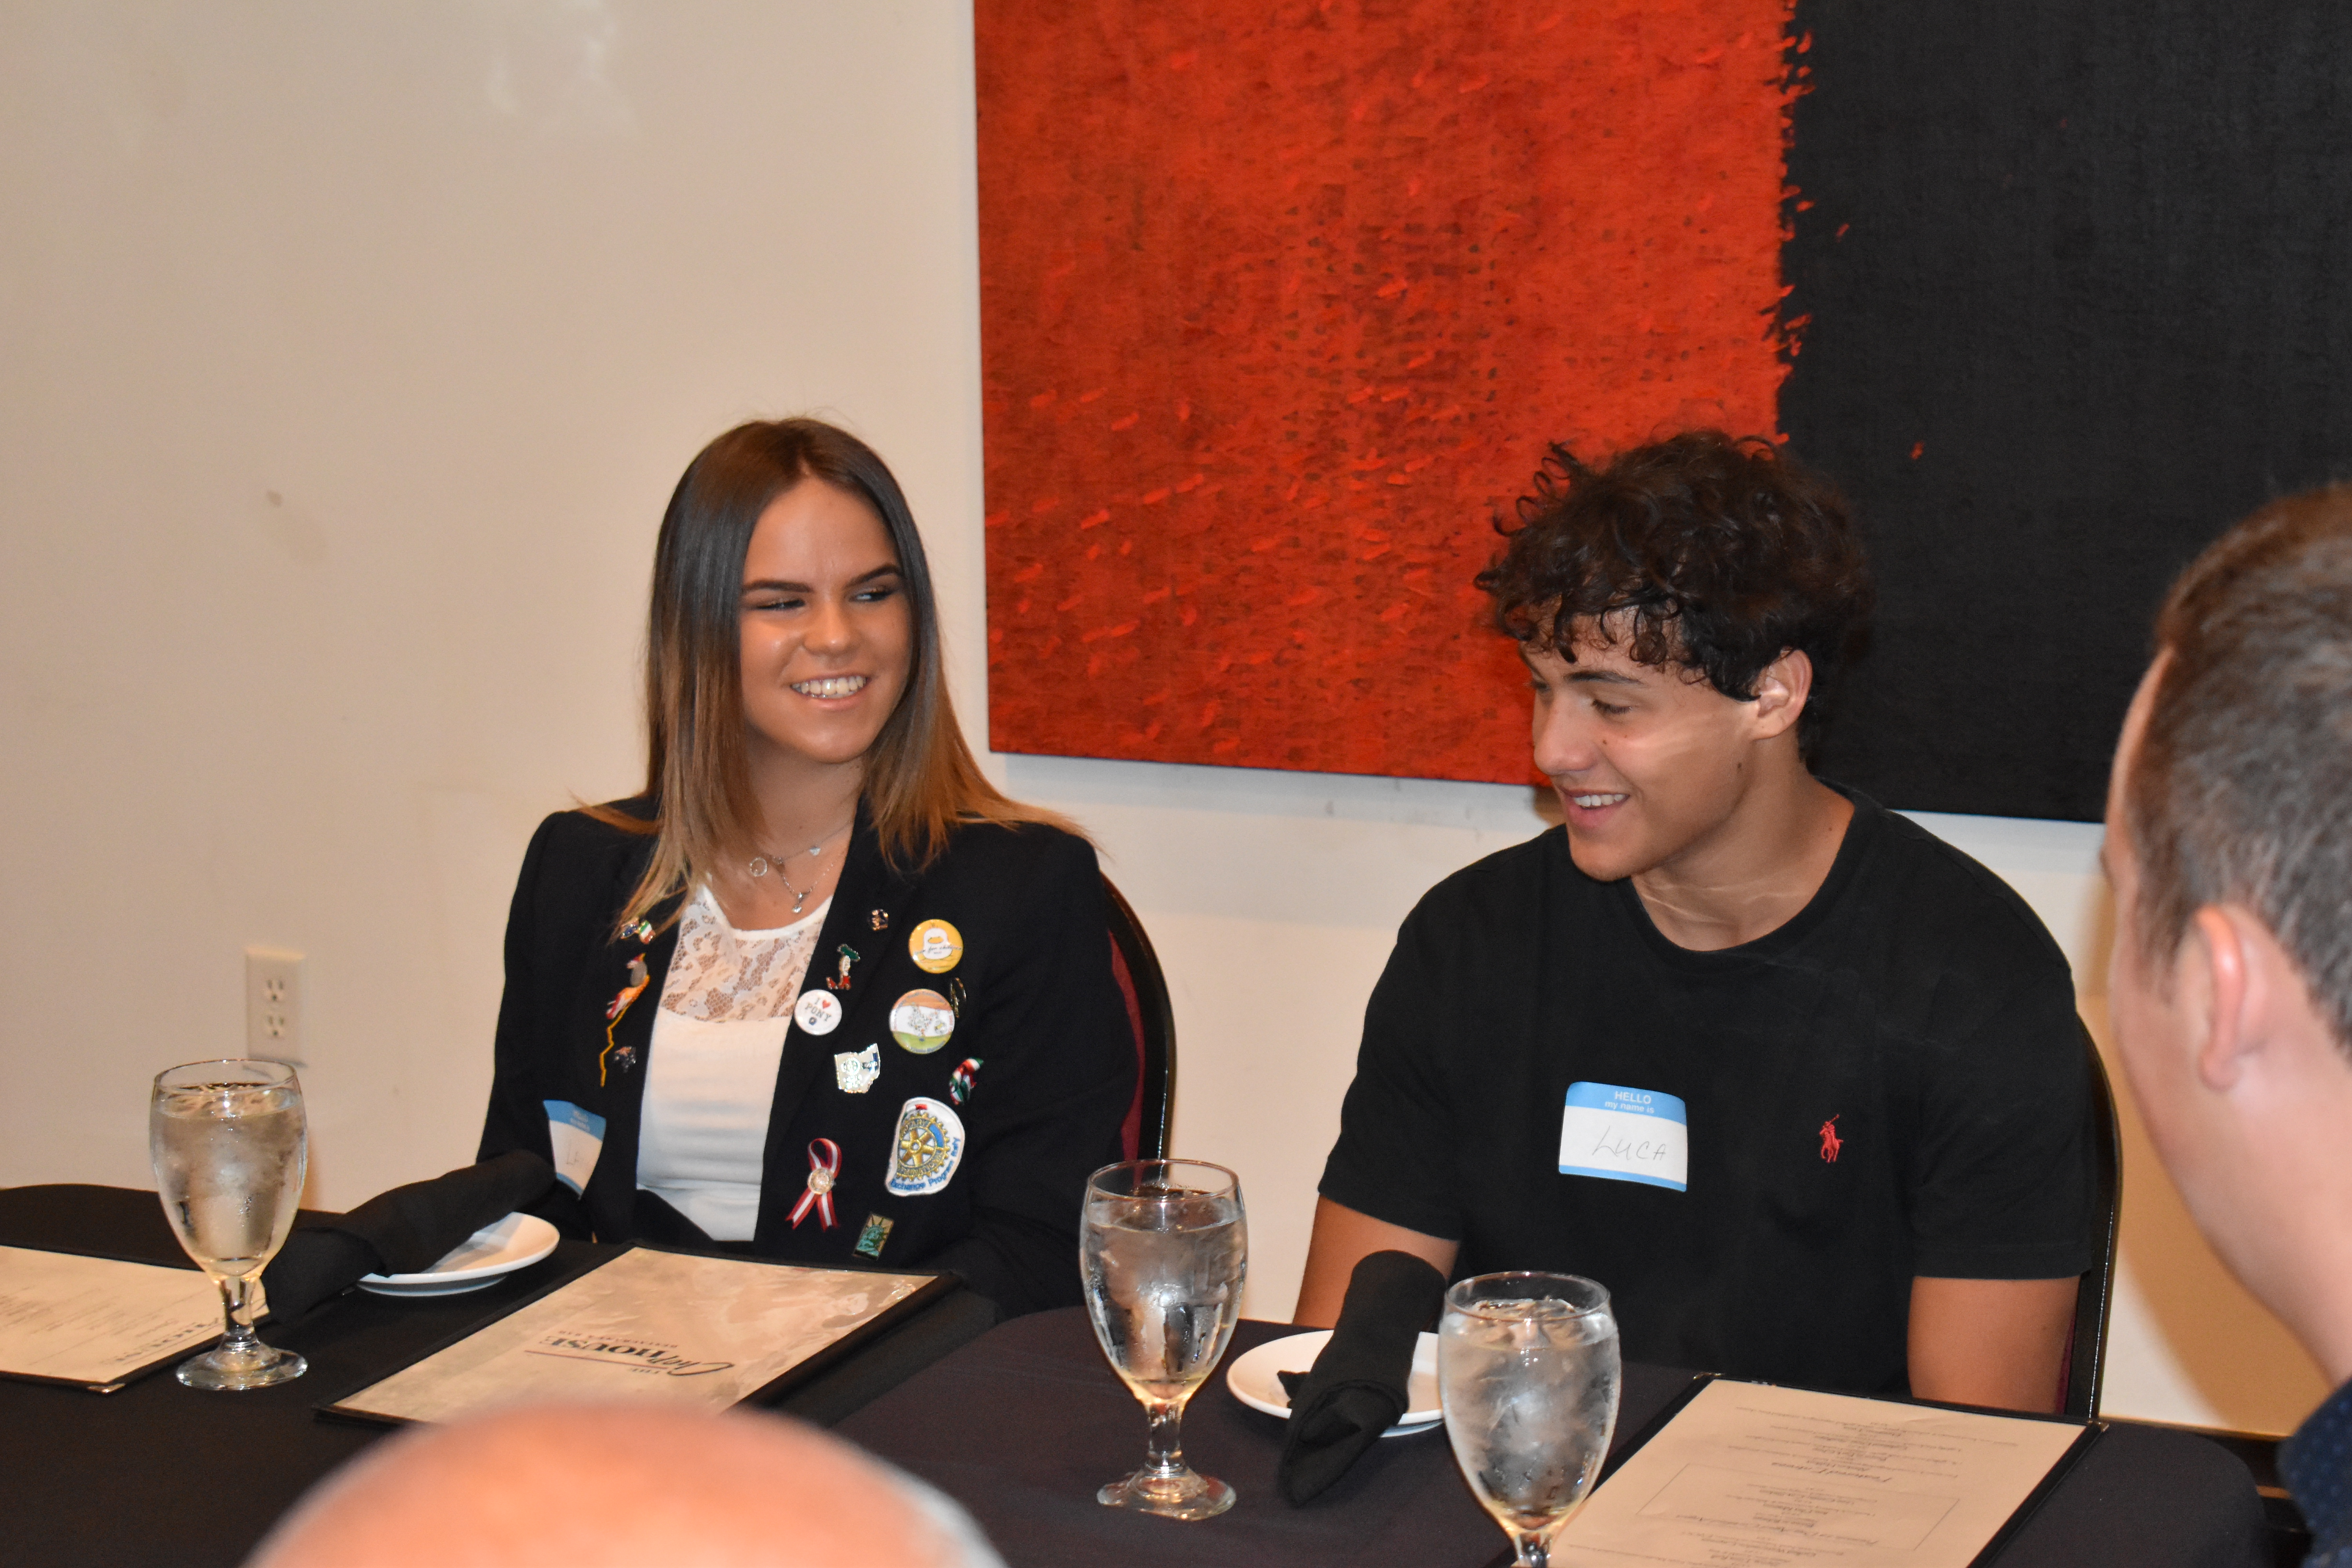 Lavinia Paliani and Luca Pedrini of Treviso, Italy, are shown at a Brookfield Rotary Club dinner honoring their stay in the U.S. NEWS On the Green photo.